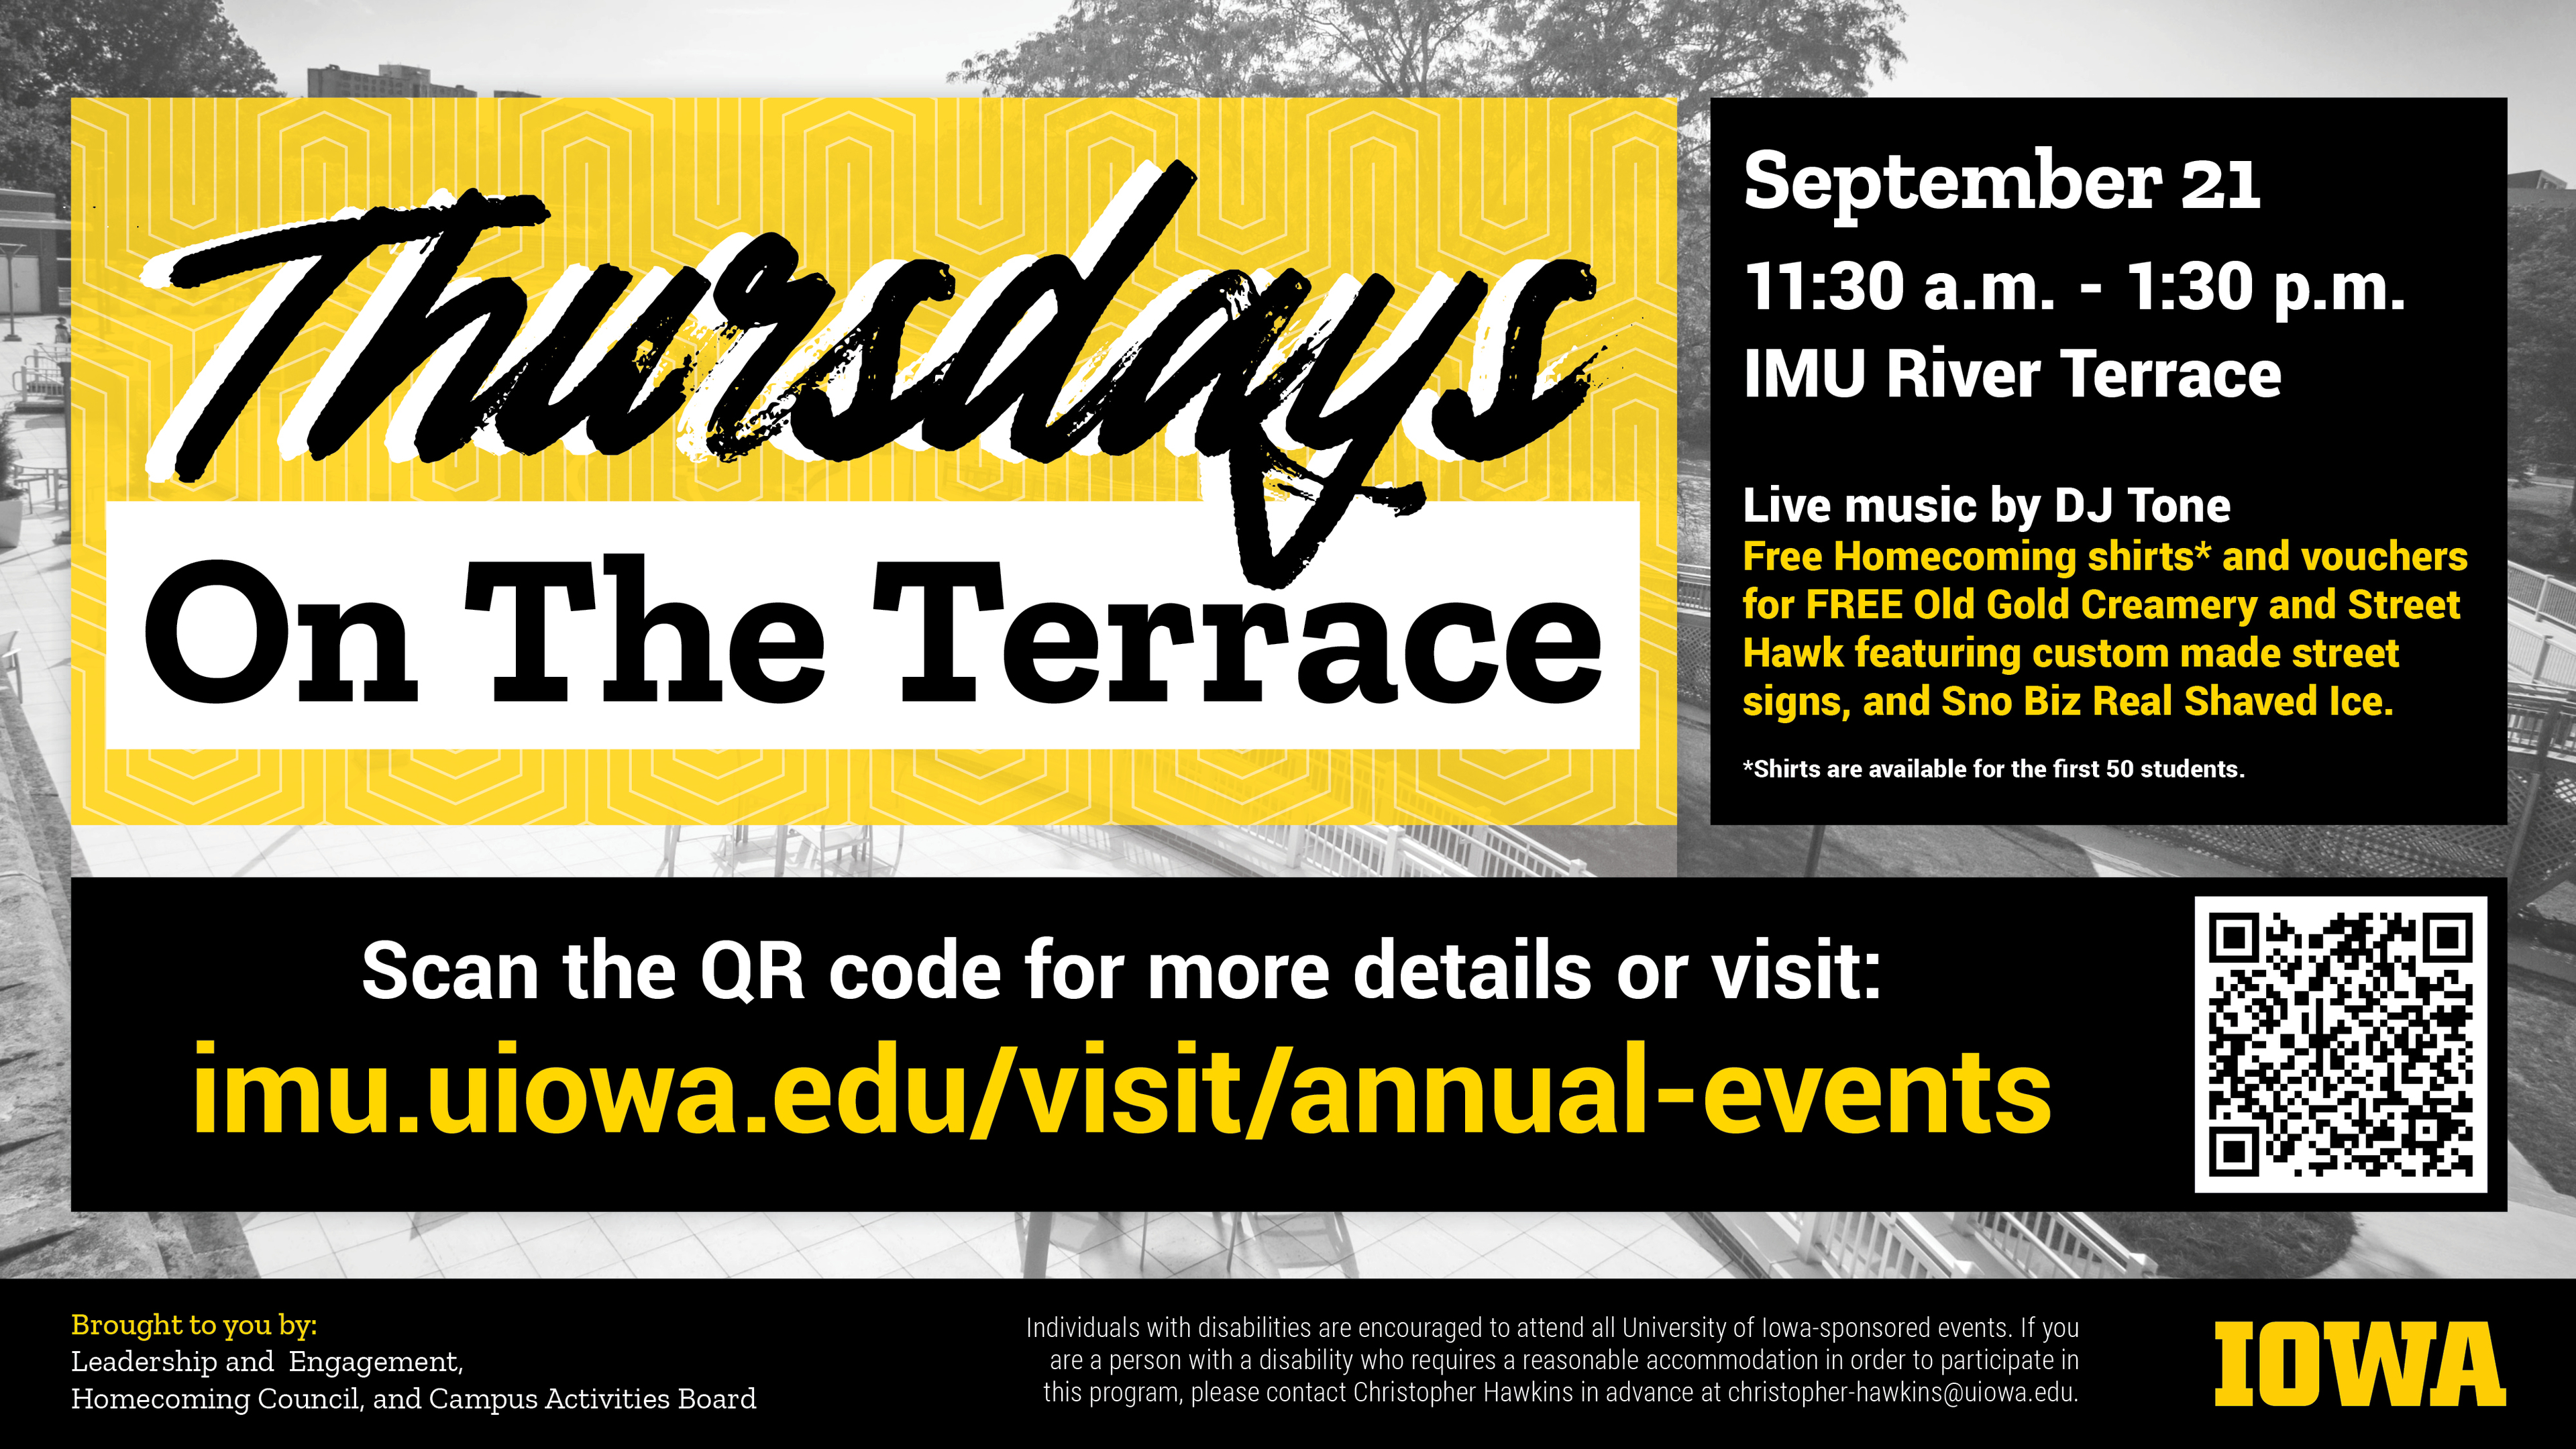 Thursdays on the Terrace: Lunch Edition will be taking place on September 21